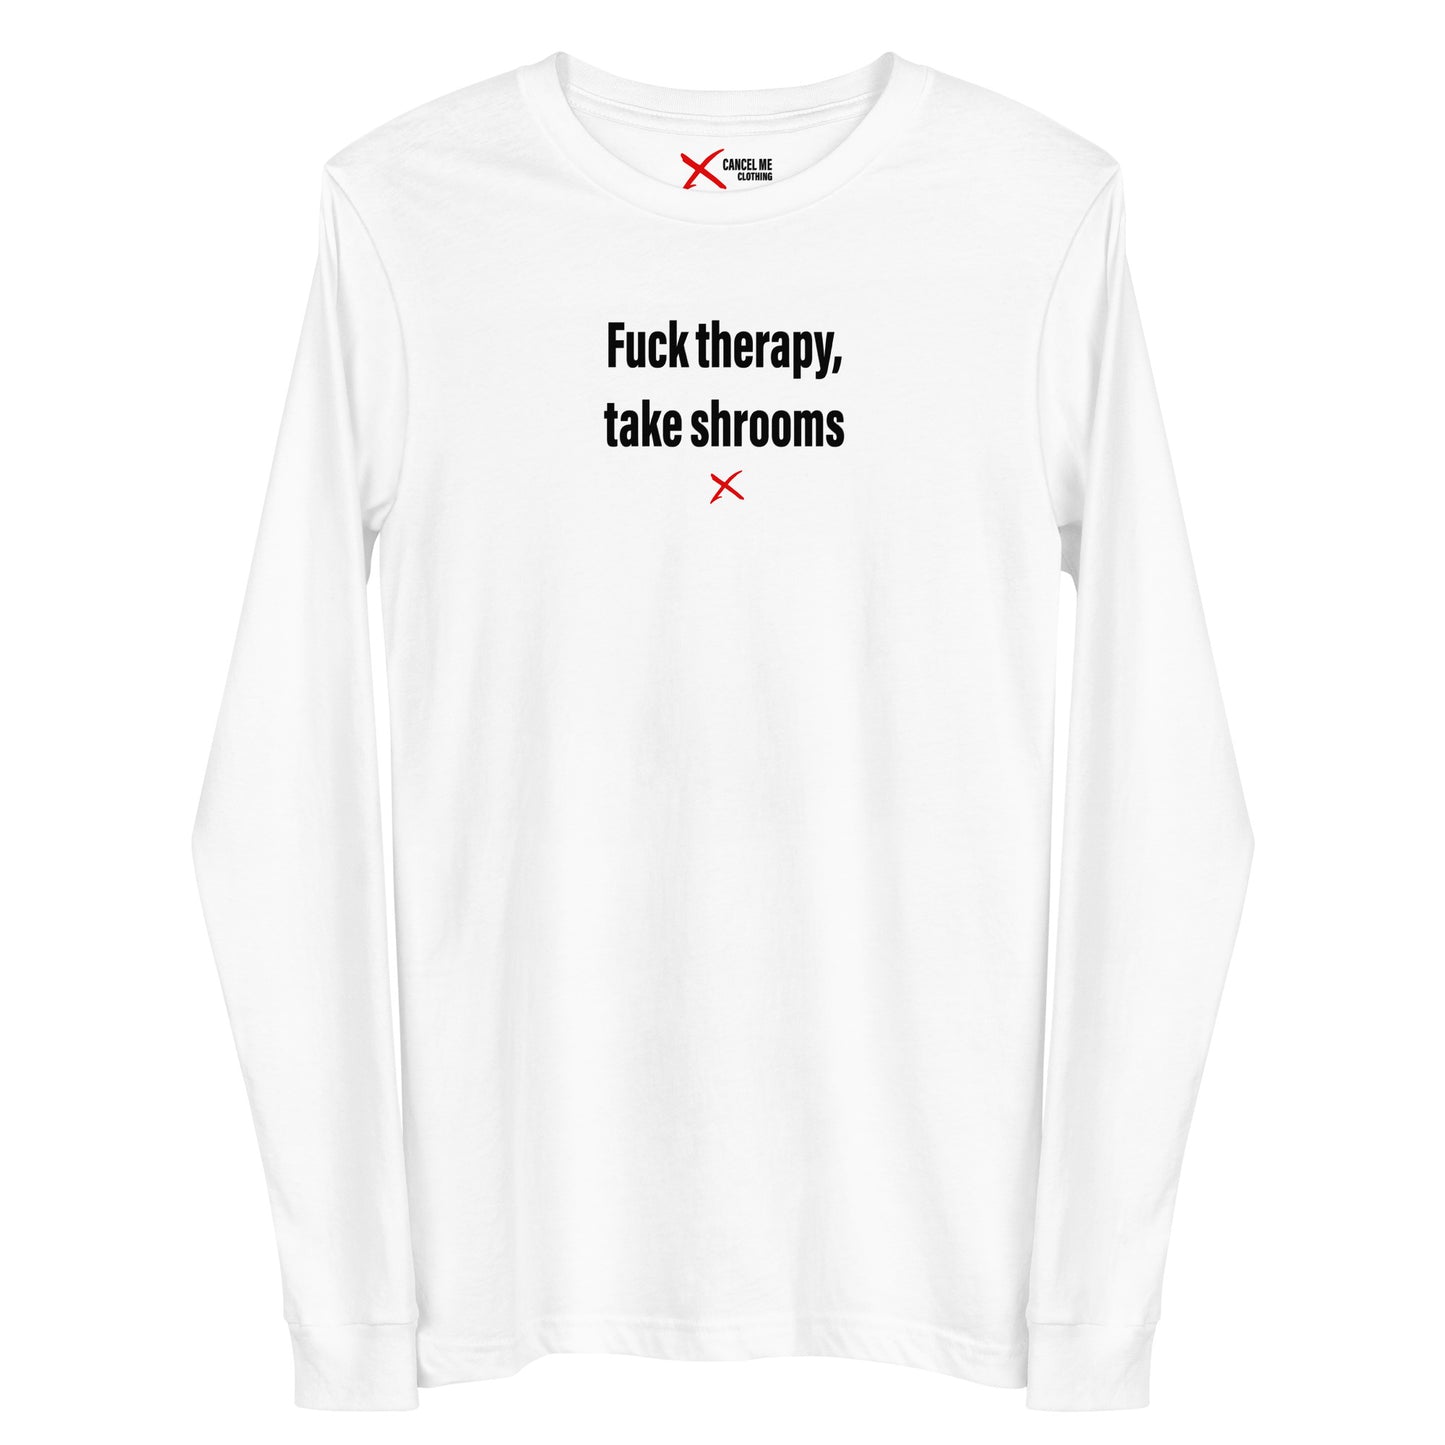 Fuck therapy, take shrooms - Longsleeve